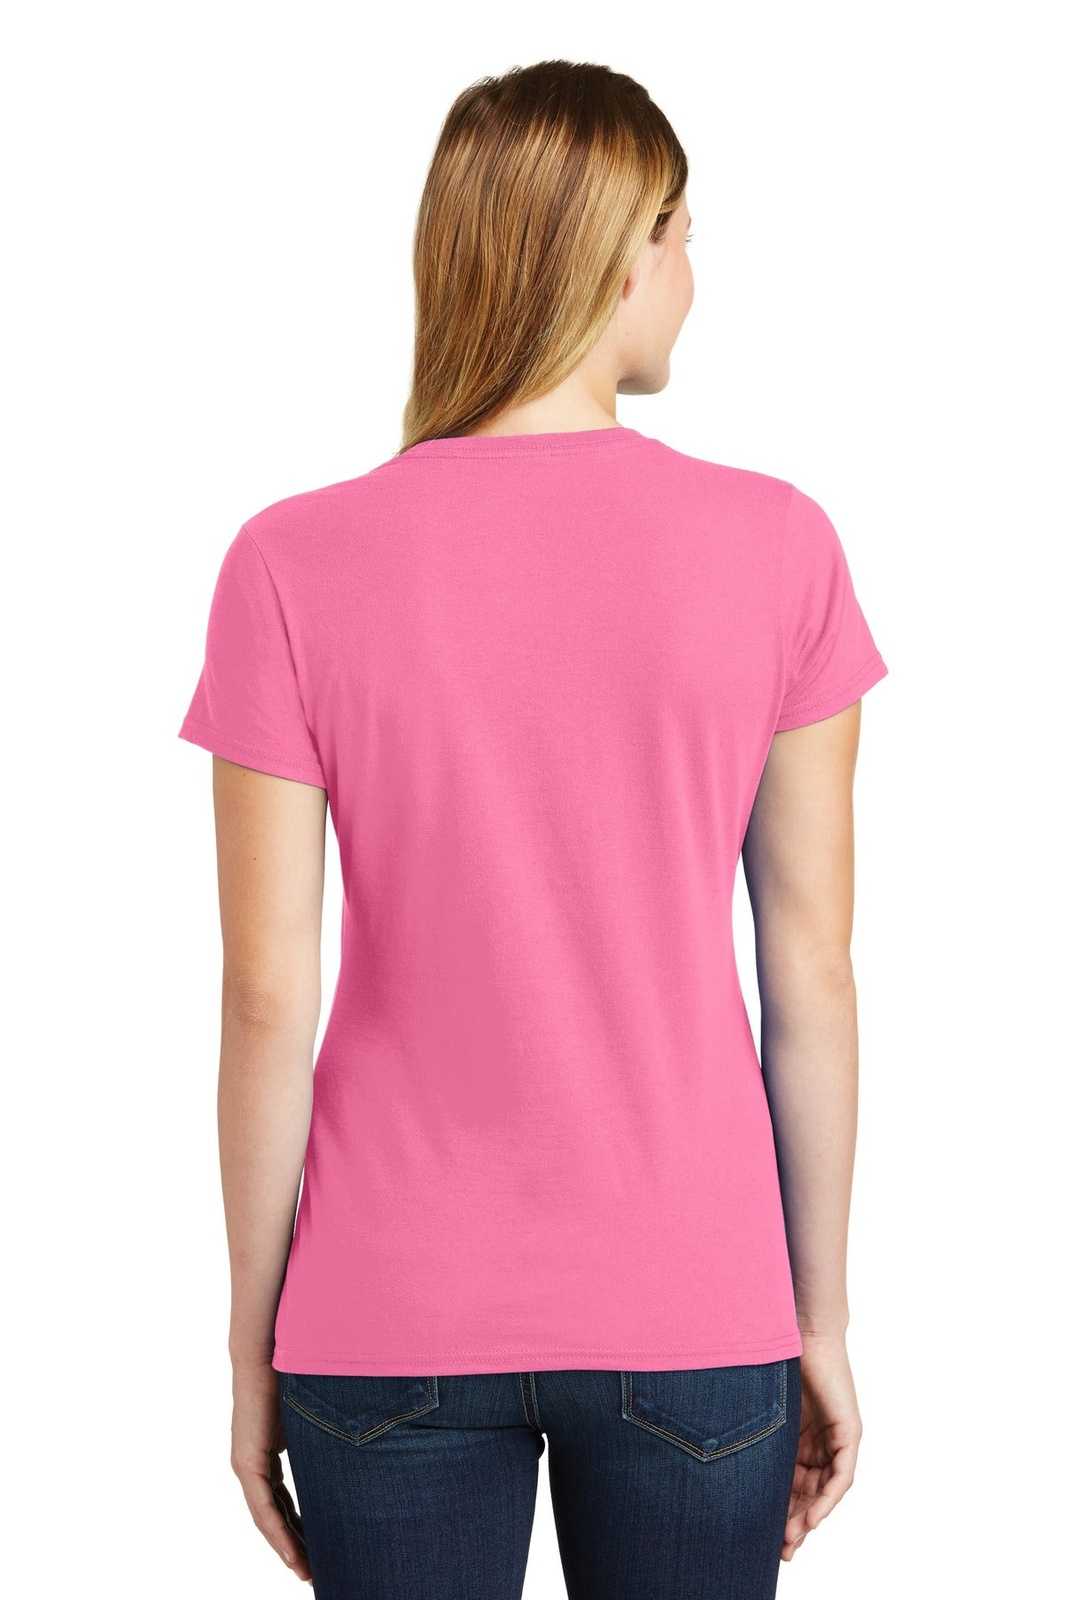 Port &amp; Company LPC450 Ladies Fan Favorite Tee - New Pink - HIT a Double - 2